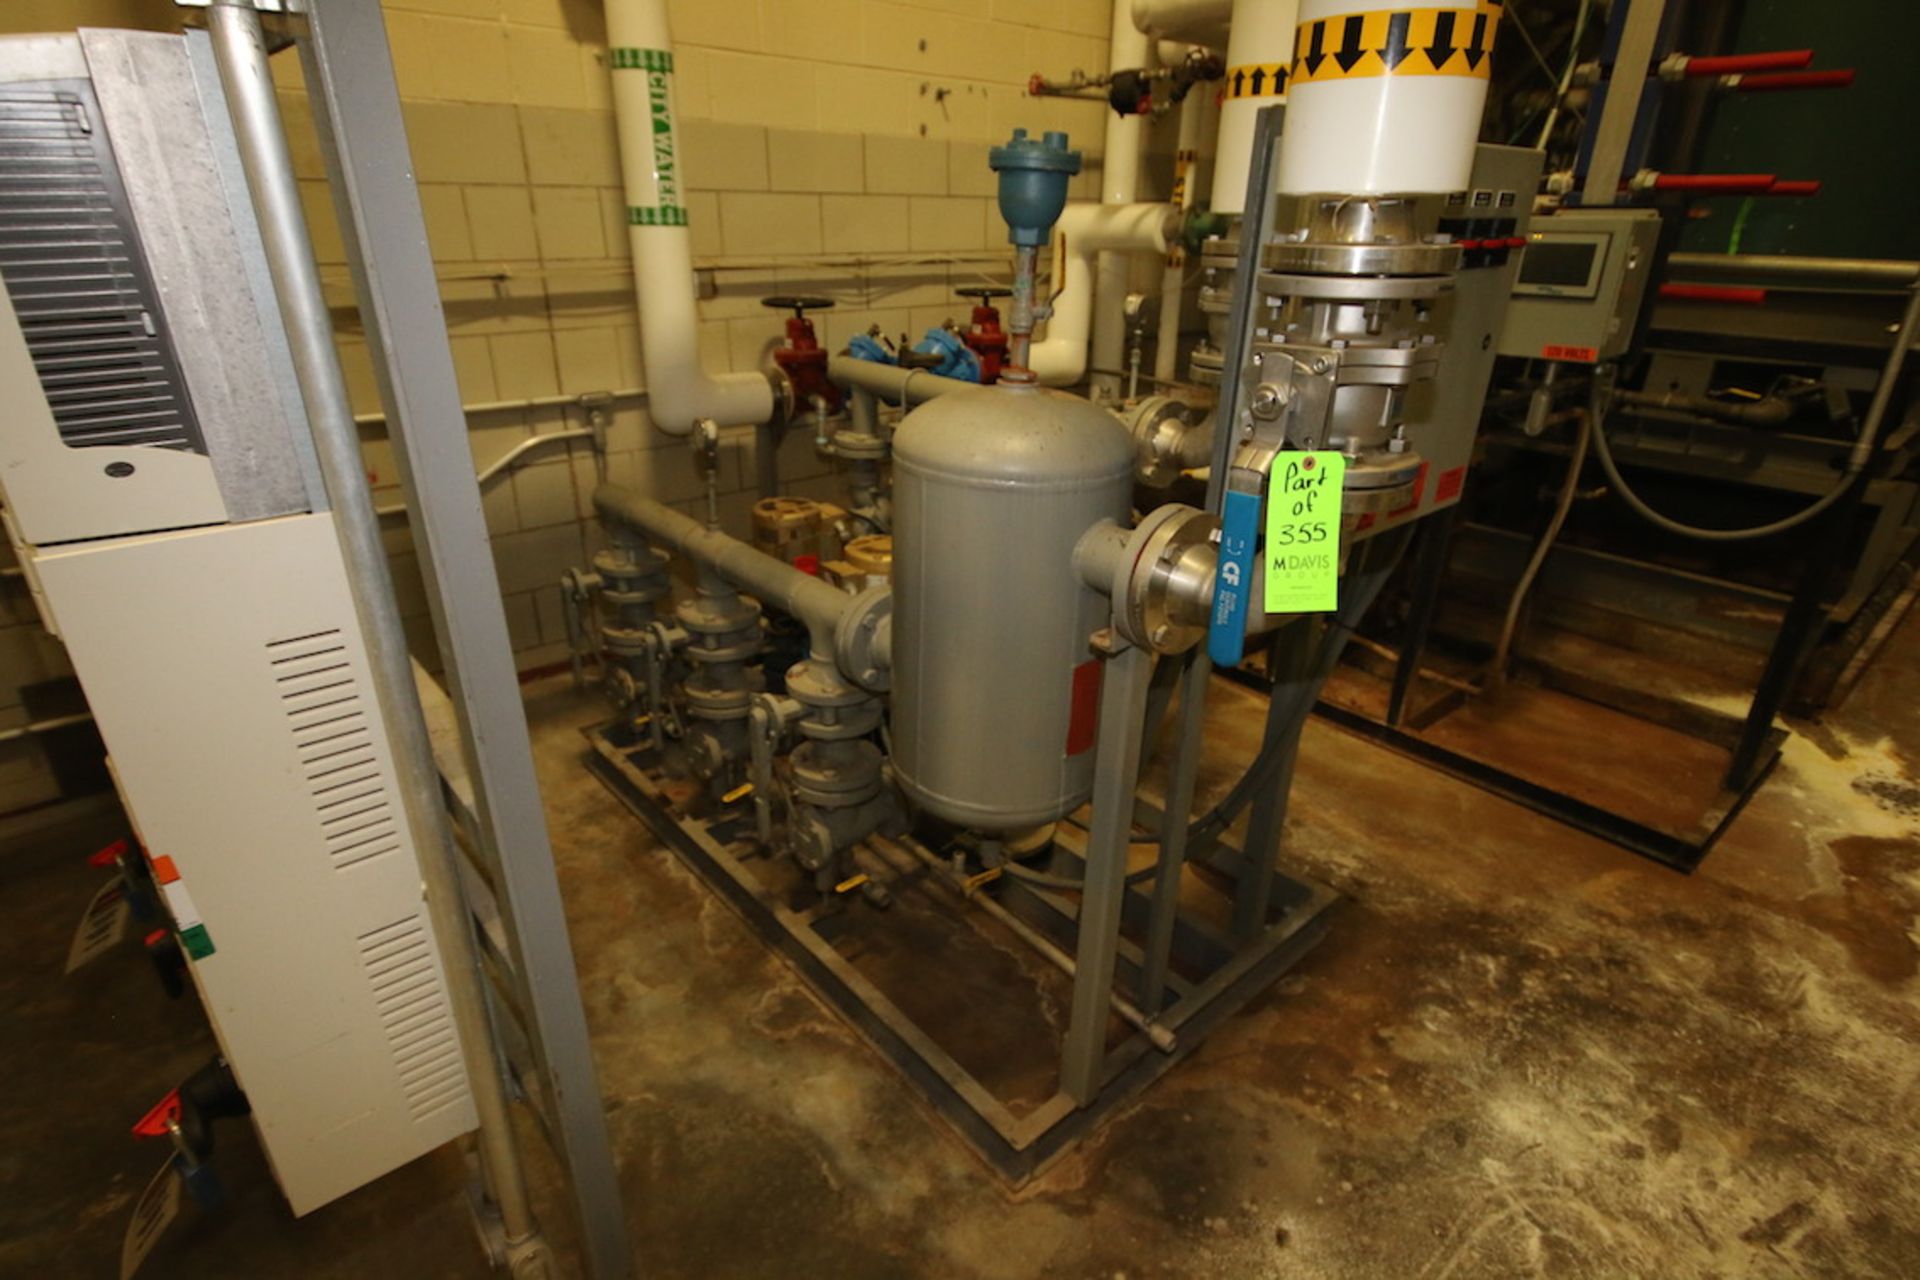 2011 Hot Water Circulation System with Alfa Laval Plate Frame -Tigerflow Skid Mounted Boiler Feed - Image 3 of 6